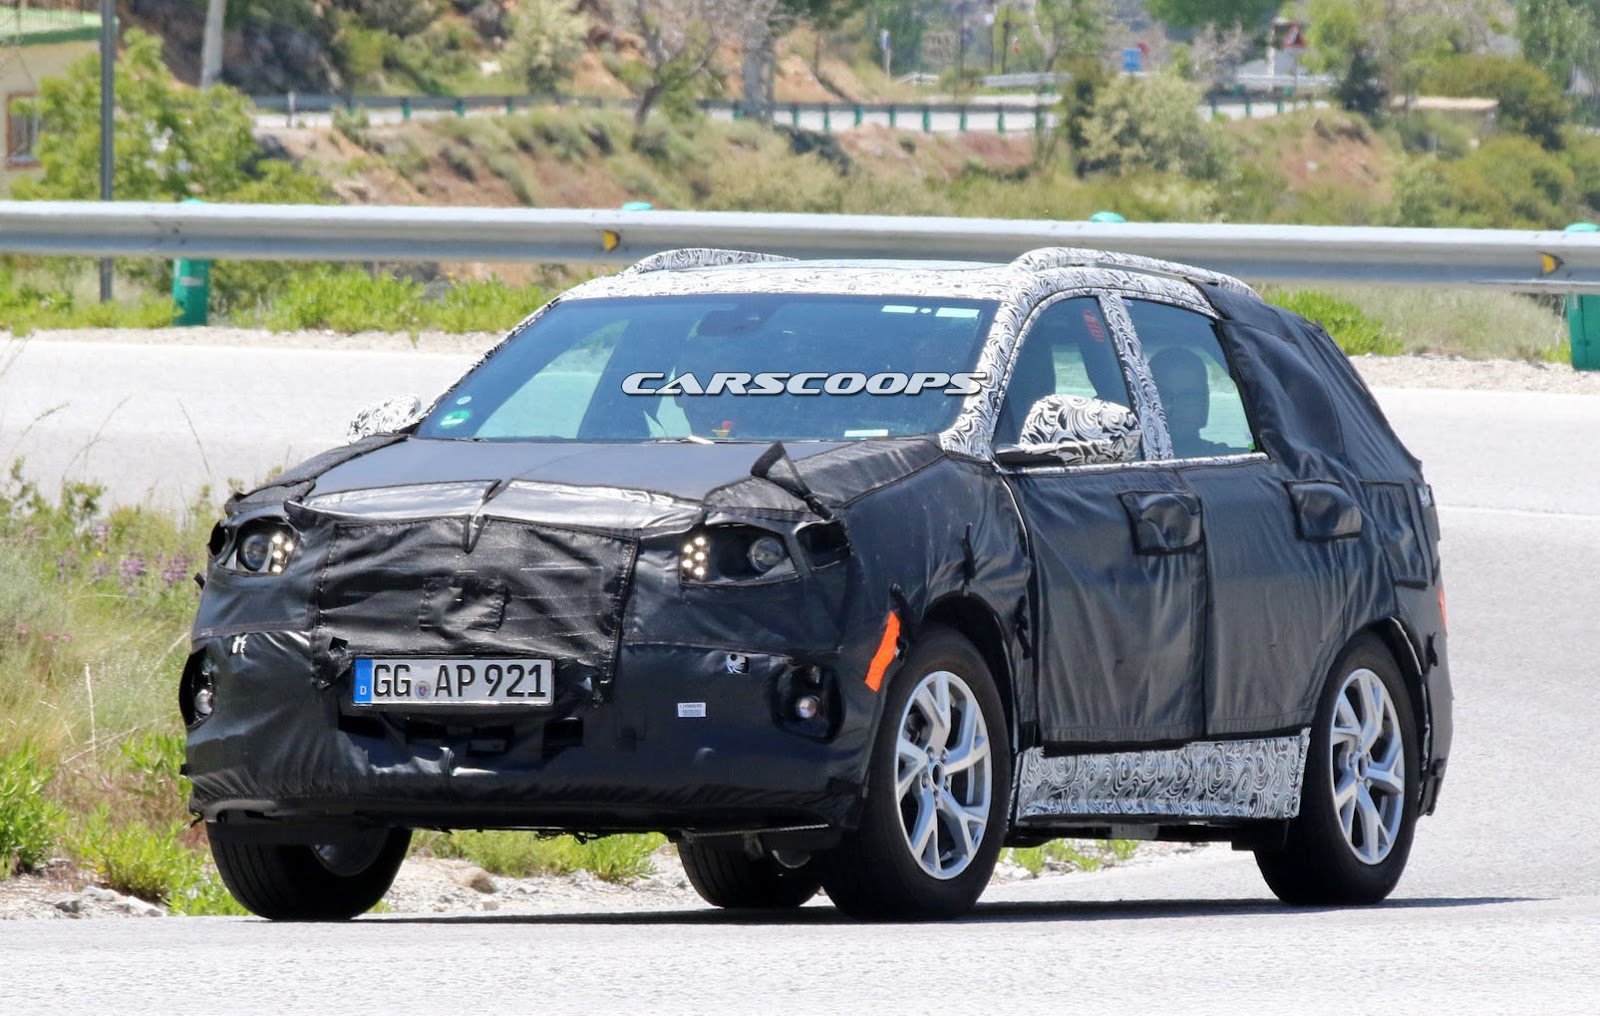 2018 Chevy Equinox / Opel Antara Prototype Spotted With Bad Boy ...